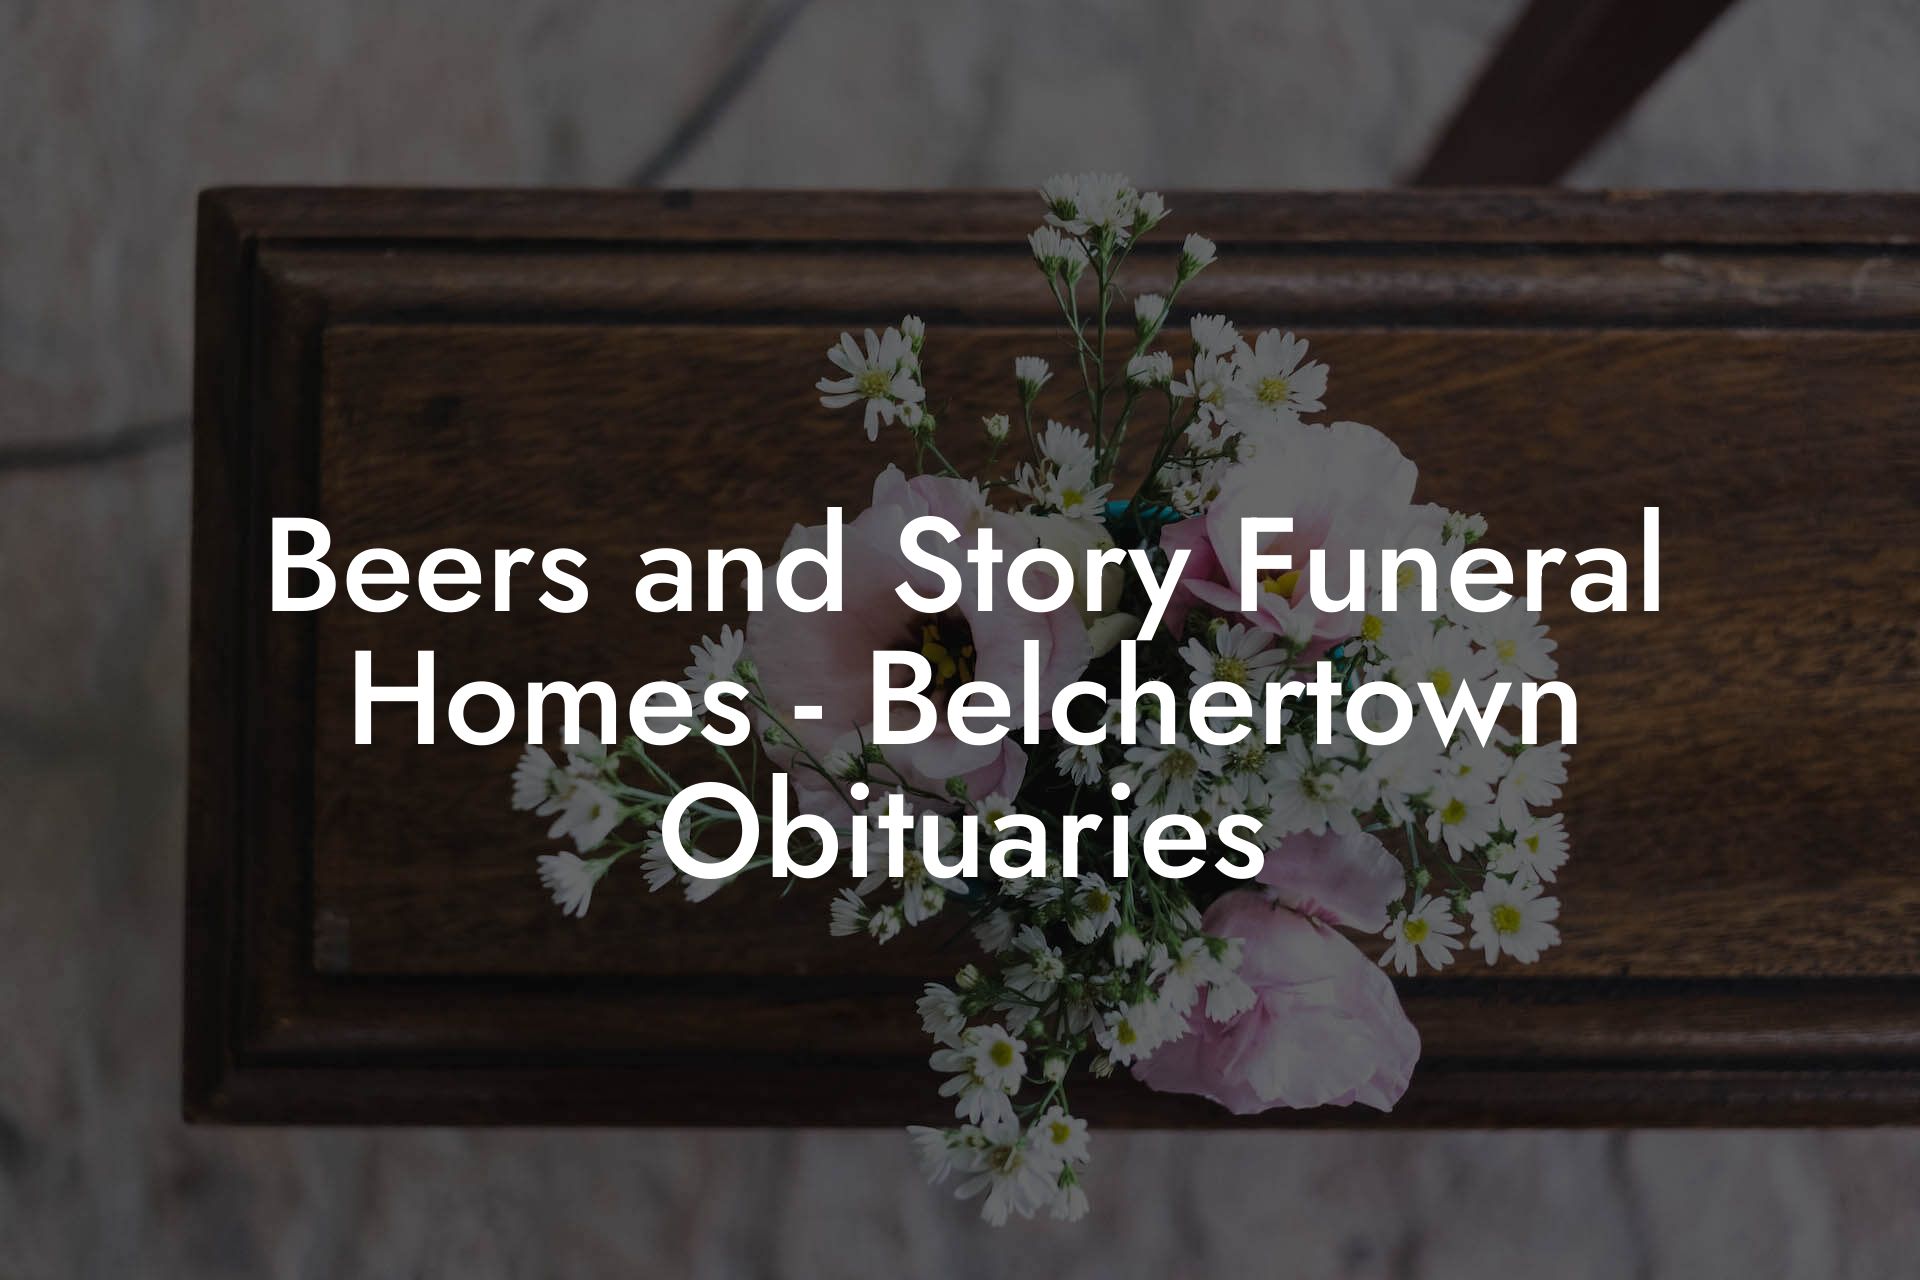 Beers and Story Funeral Homes - Belchertown Obituaries